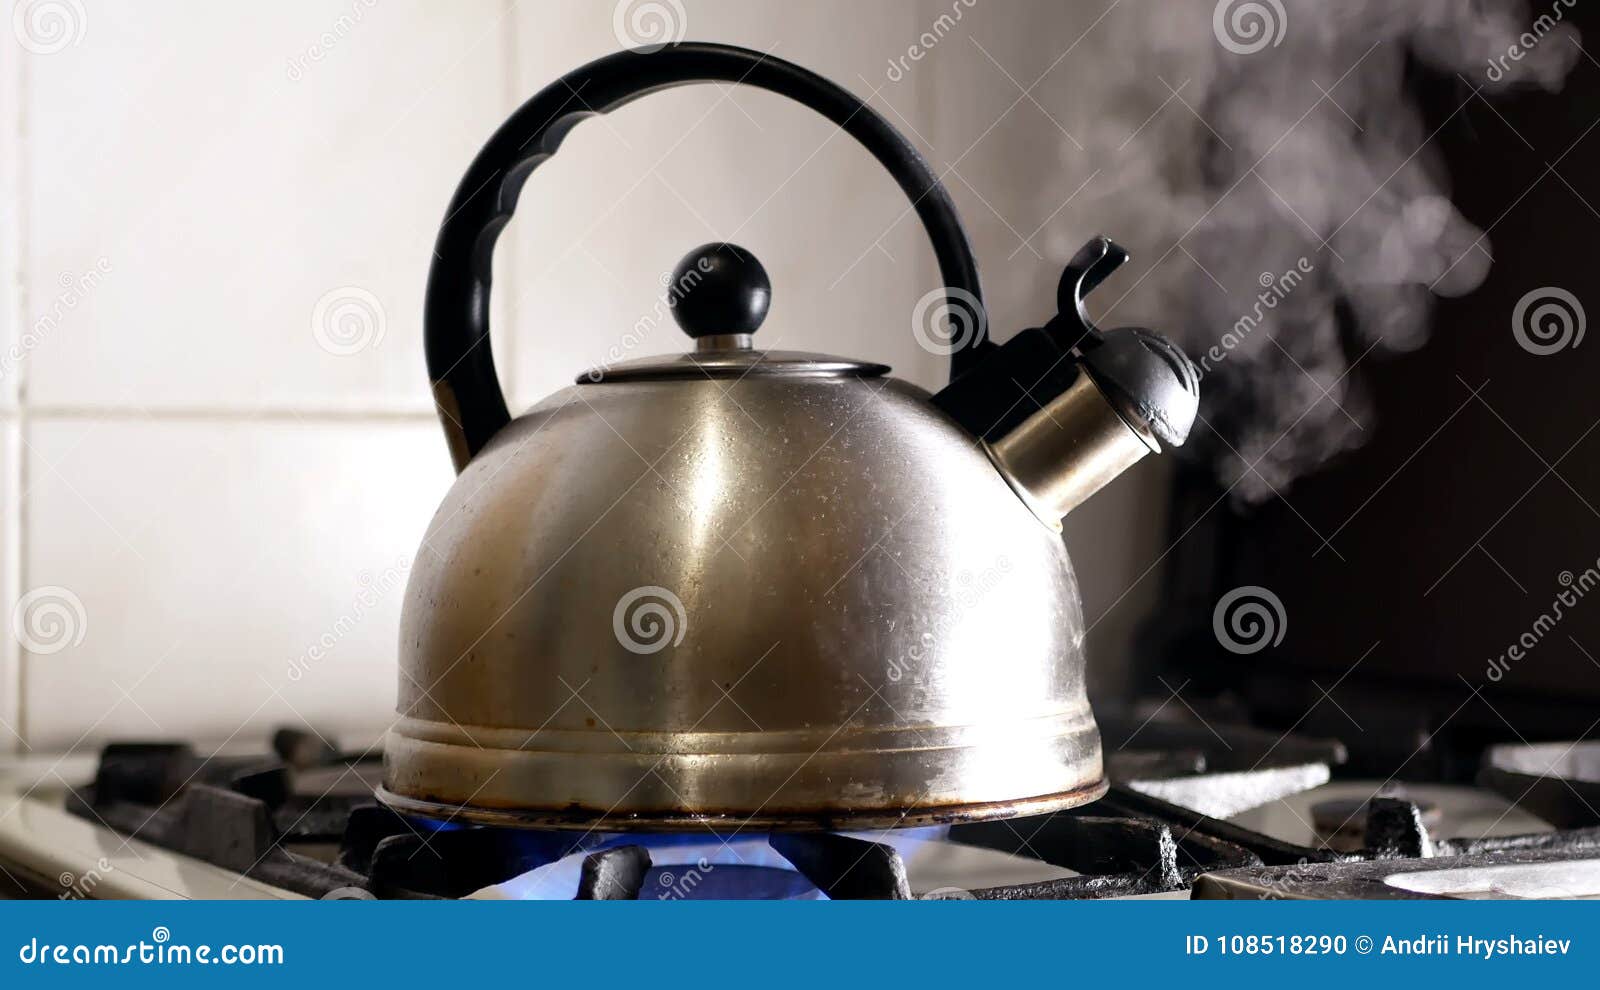 https://thumbs.dreamstime.com/z/kettle-stove-cup-table-hot-hot-cup-tea-kettle-108518290.jpg